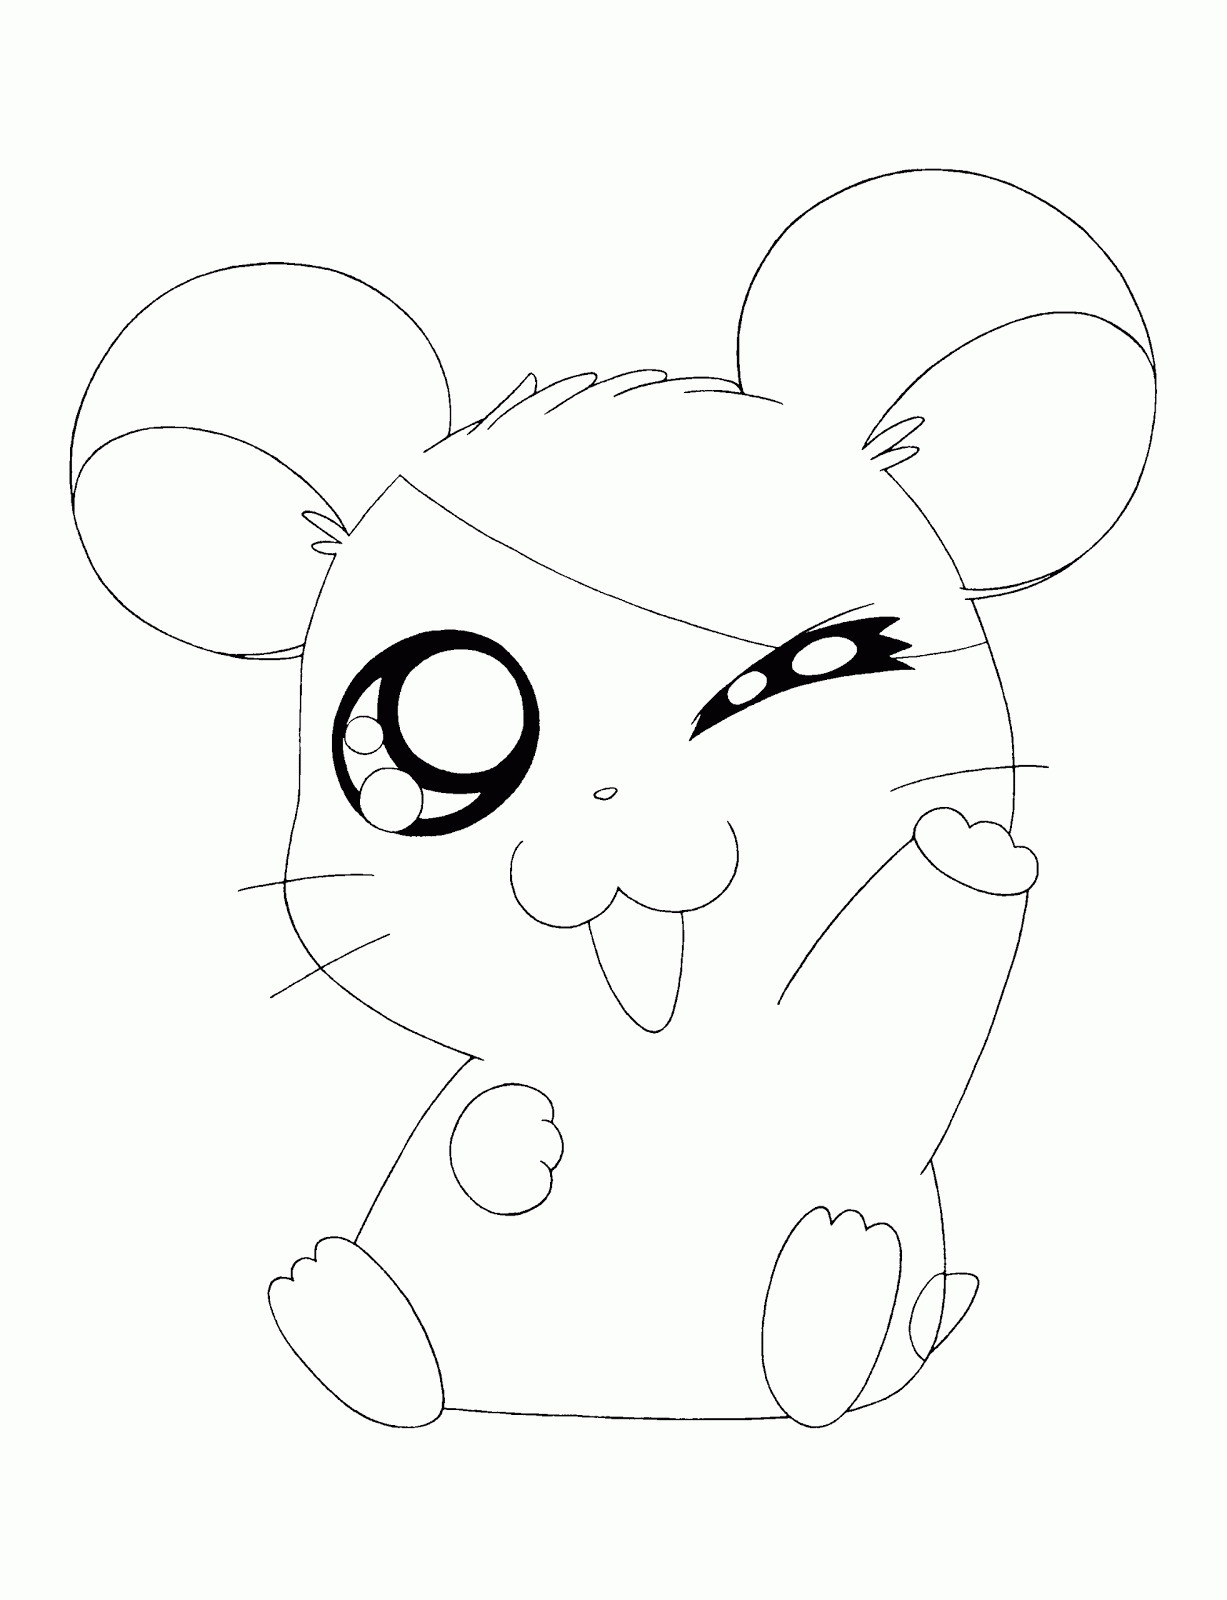 Cartoon Character Animals Coloring Pages | Coloring Pages For All Ages